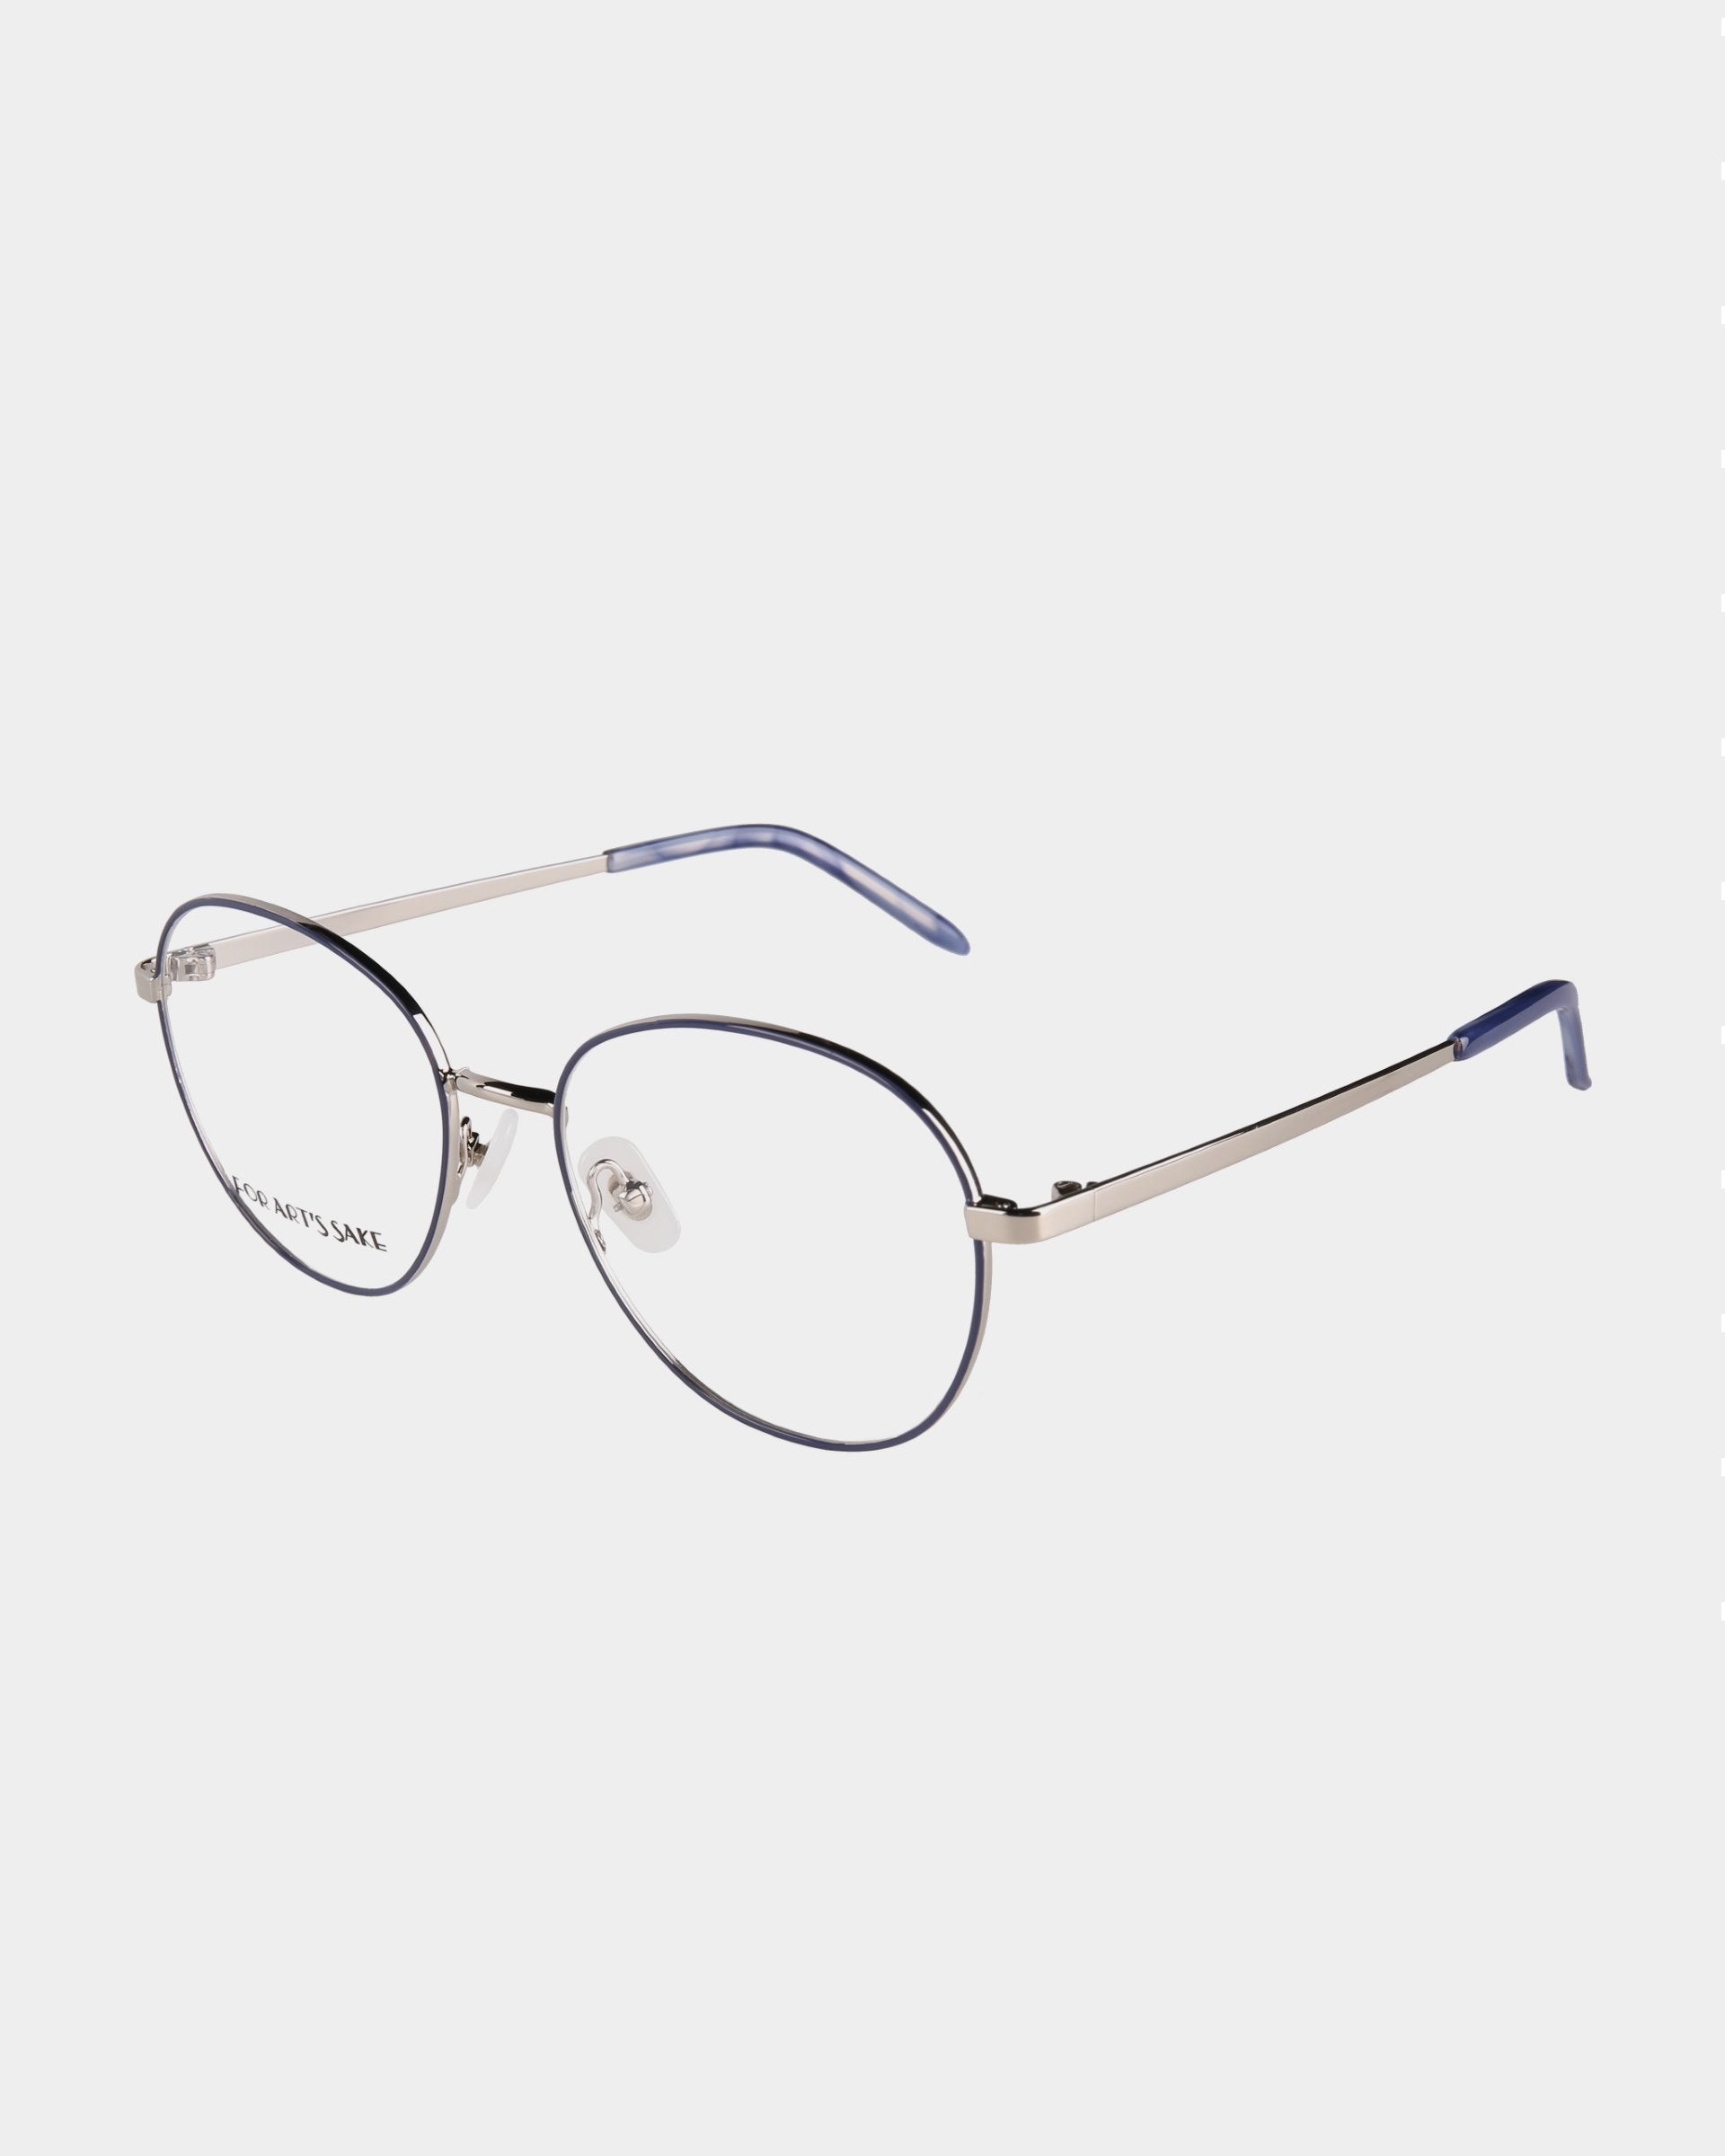 A pair of sleek, round-framed Hailey eyeglasses by For Art&#39;s Sake® with a metallic silver bridge and temples. The temple tips are blue, and the frame has a subtle blue accent around the rims. Featuring adjustable nose pads for comfort, the clear lenses can include a Blue Light Filter for added eye protection.